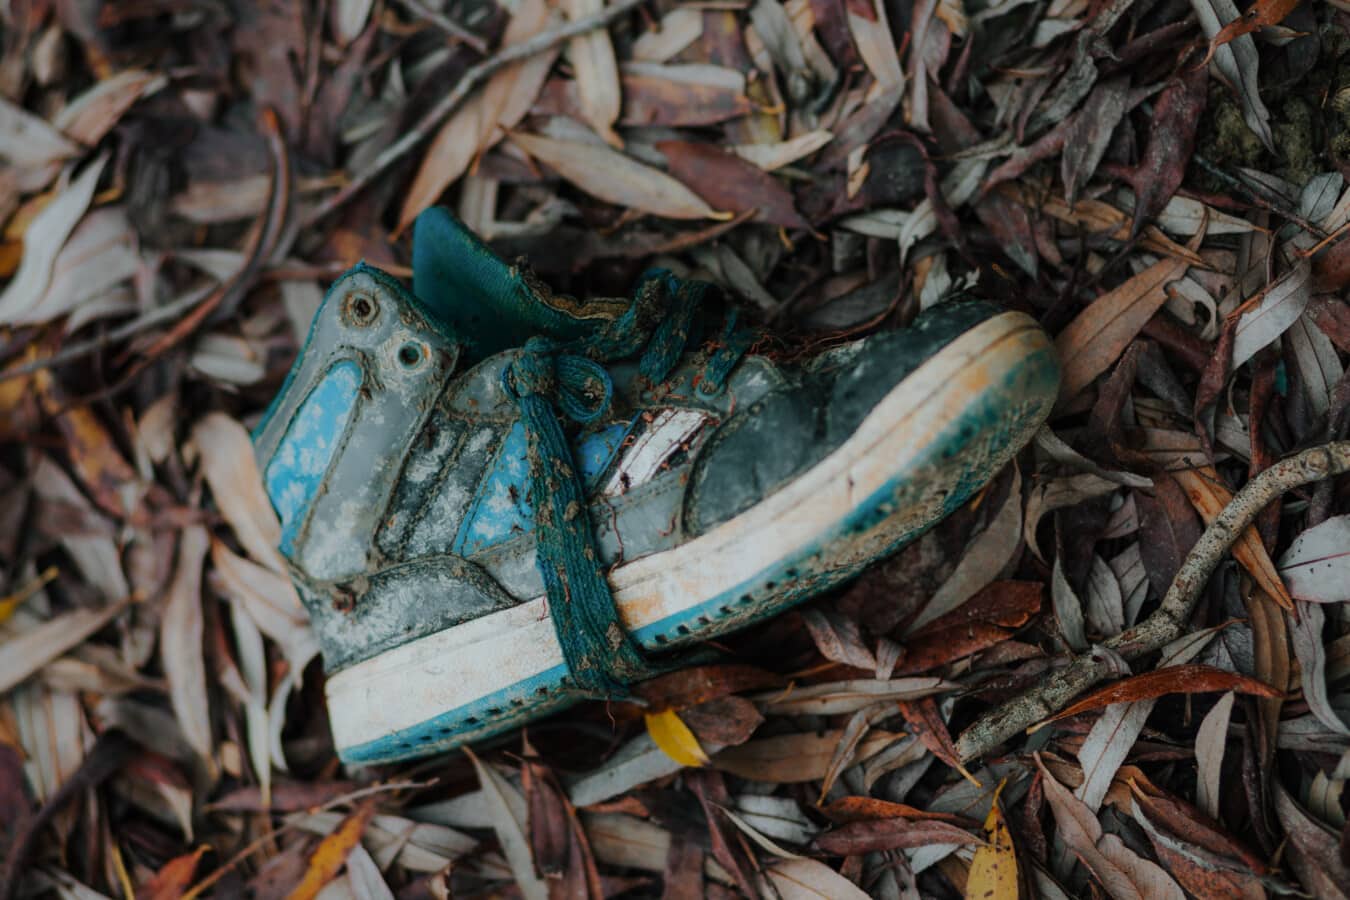 sneaker, dirty, garbage, trash, nature, recycling, wood, waste, old, abandoned